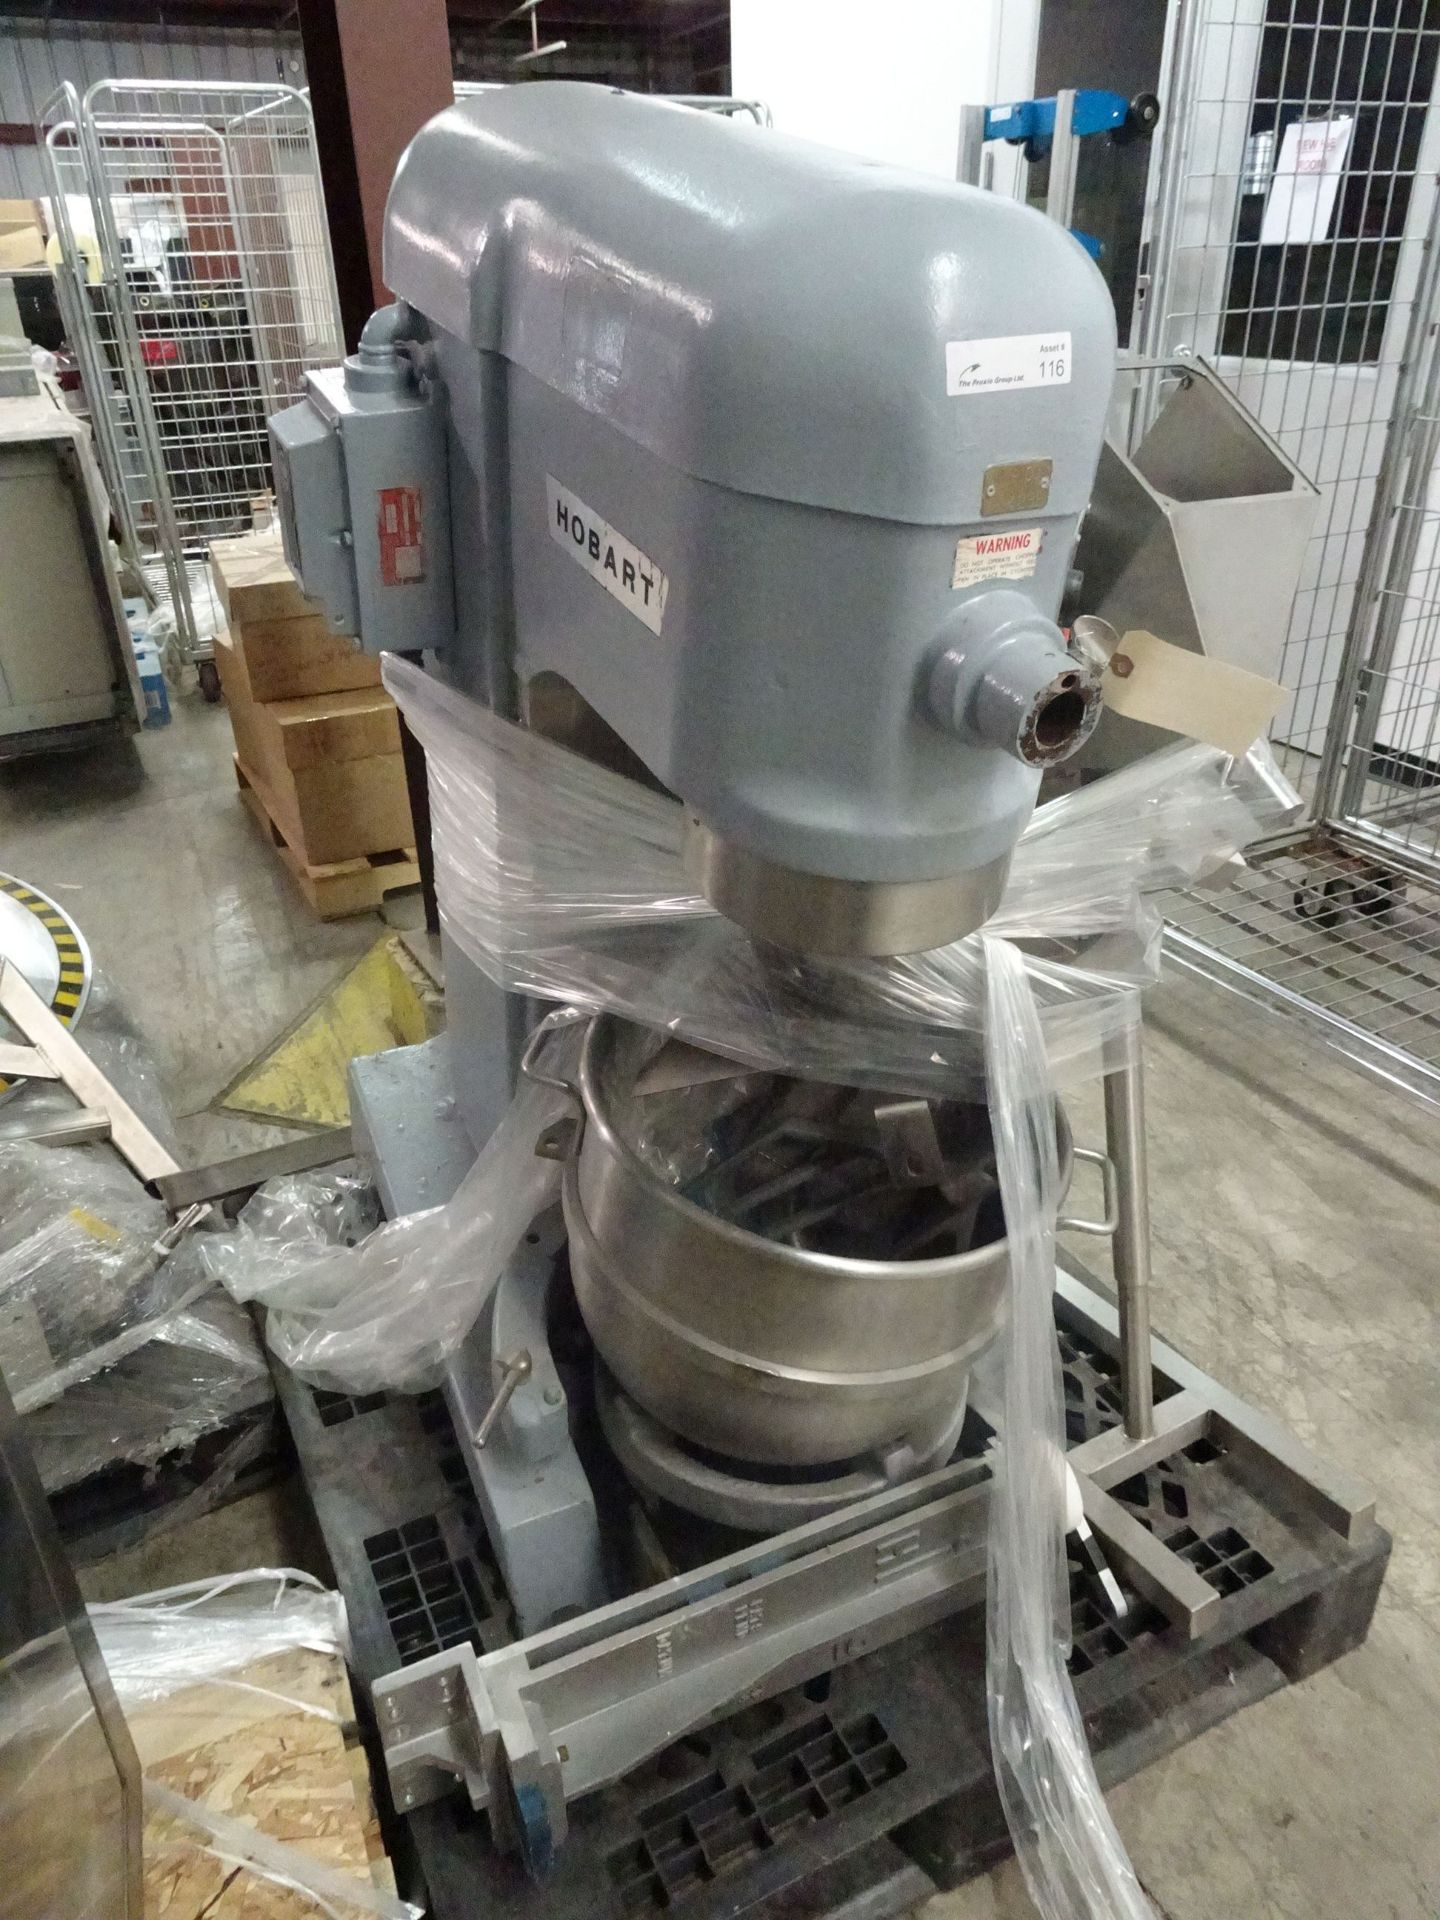 Hobart Model H-600 2HP Planetary Mixer With Bowl, Whisk, And Accessories